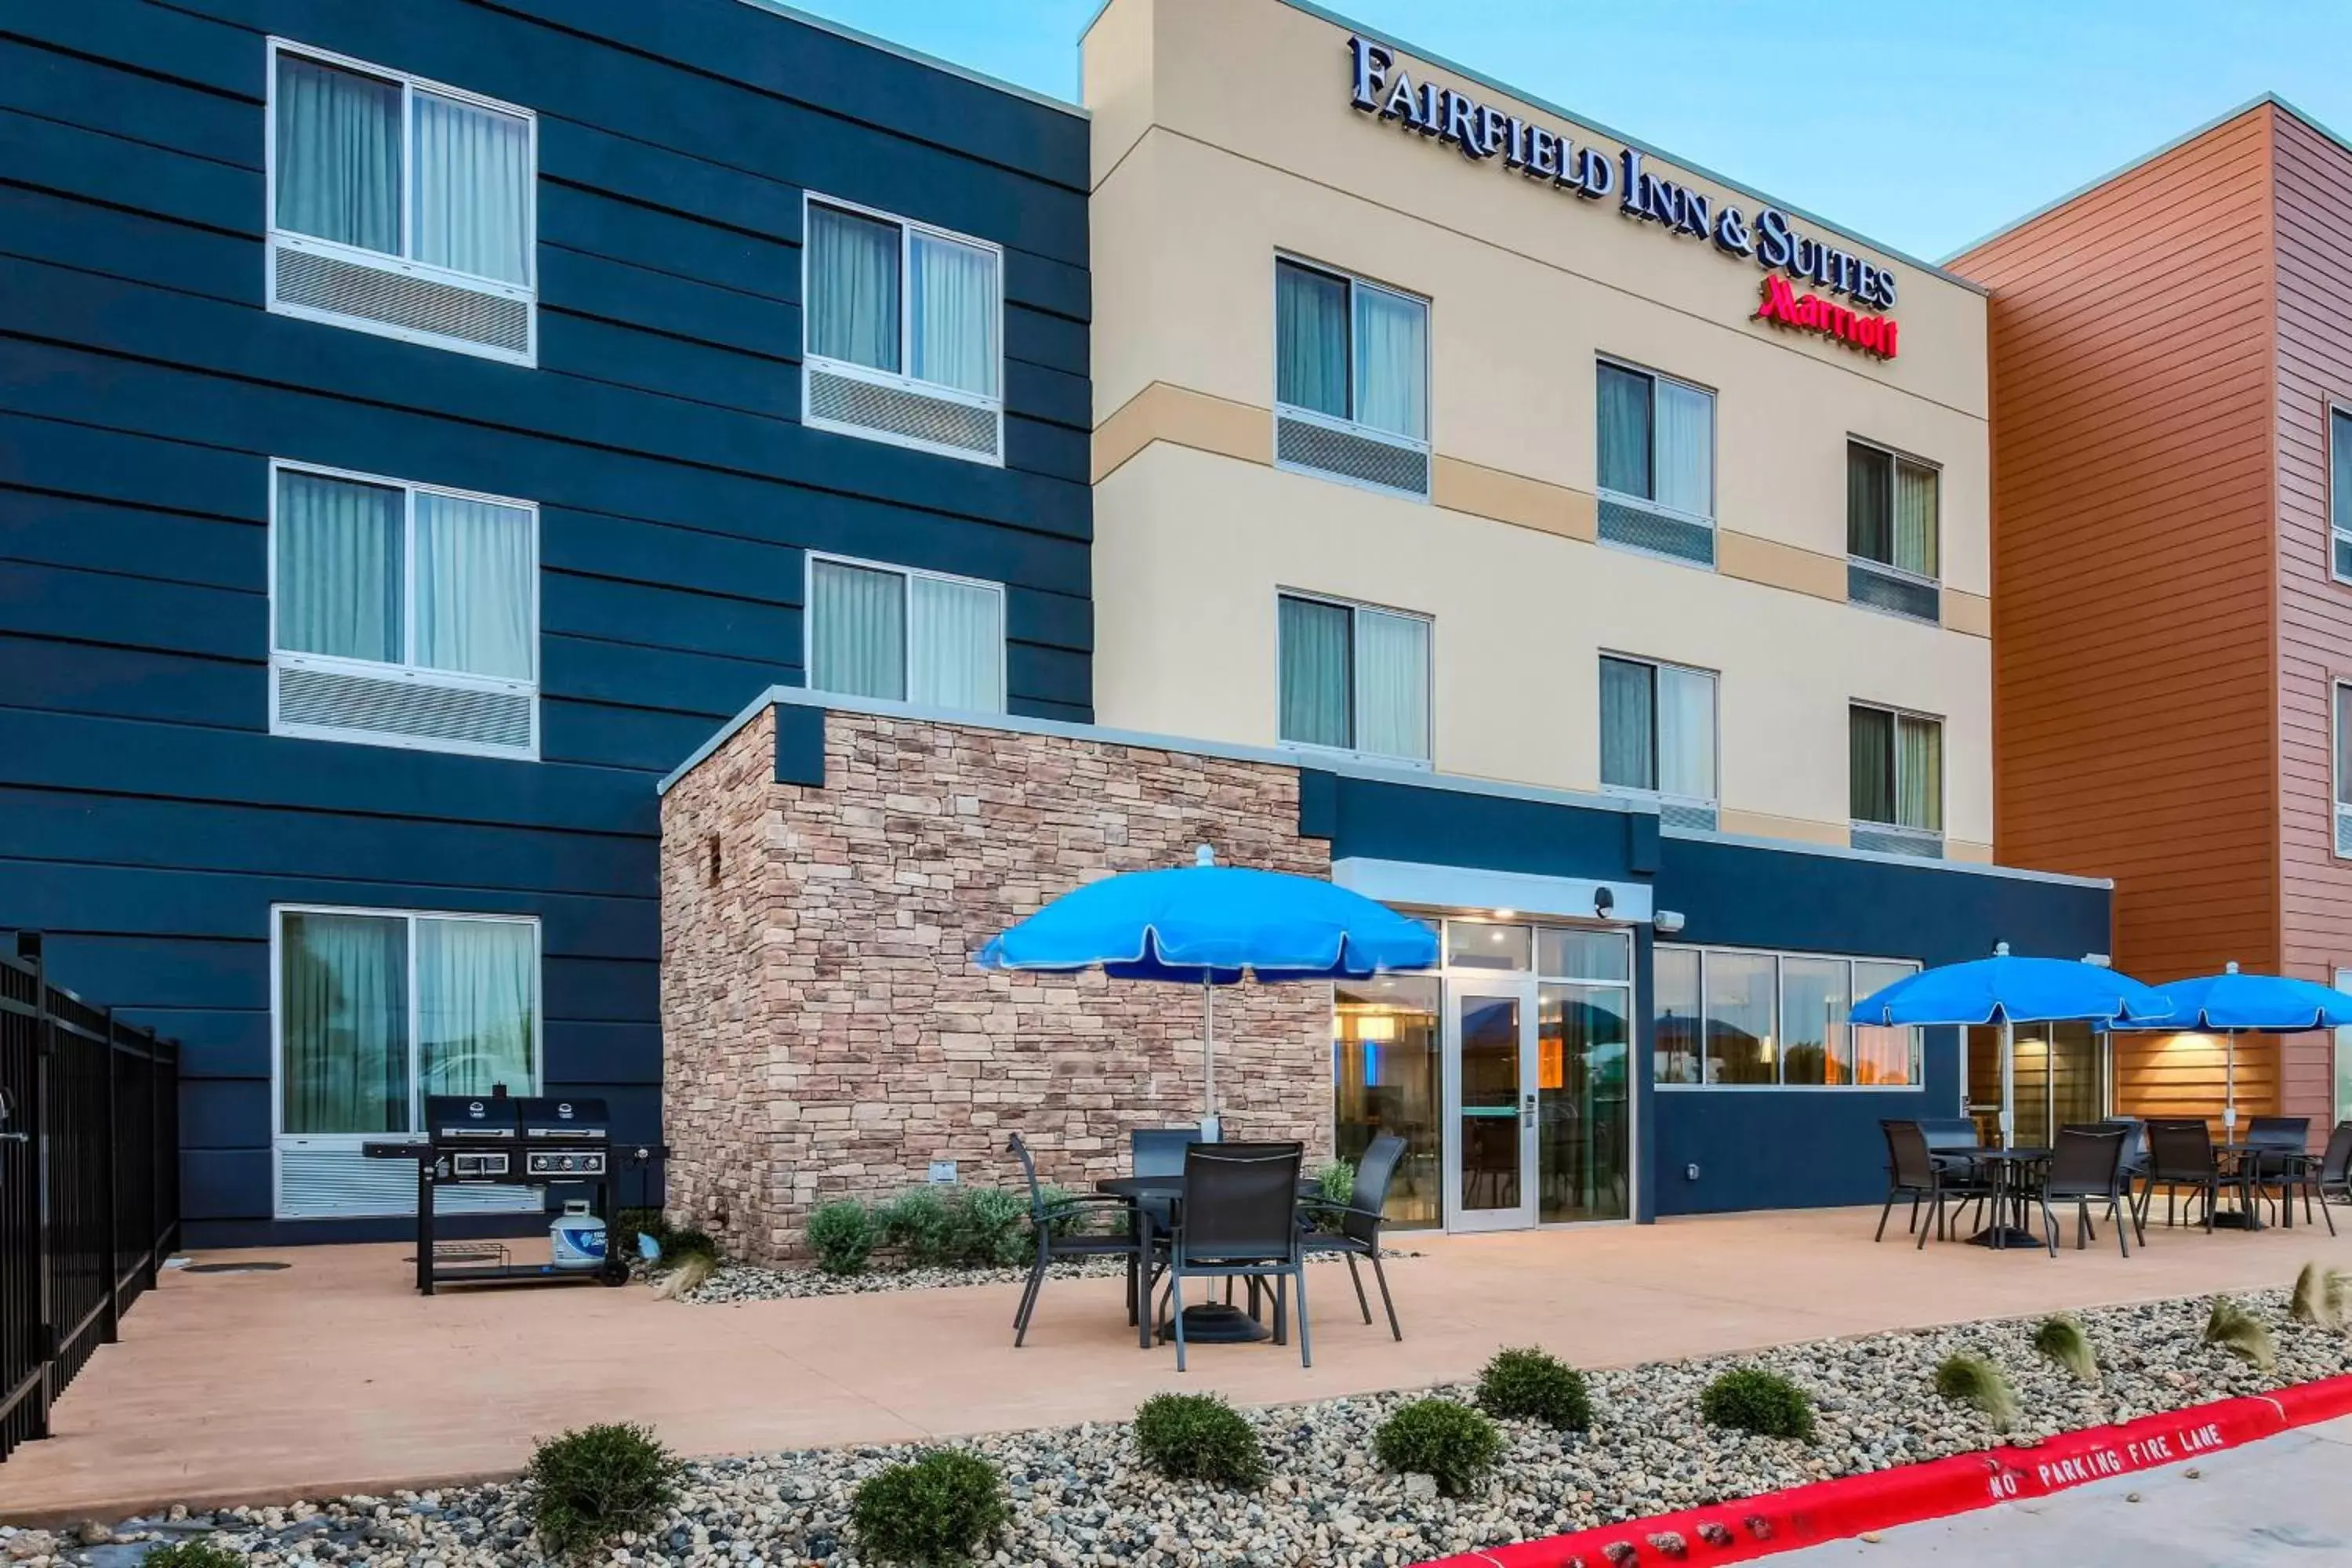 Property Building in Fairfield Inn & Suites by Marriott Snyder